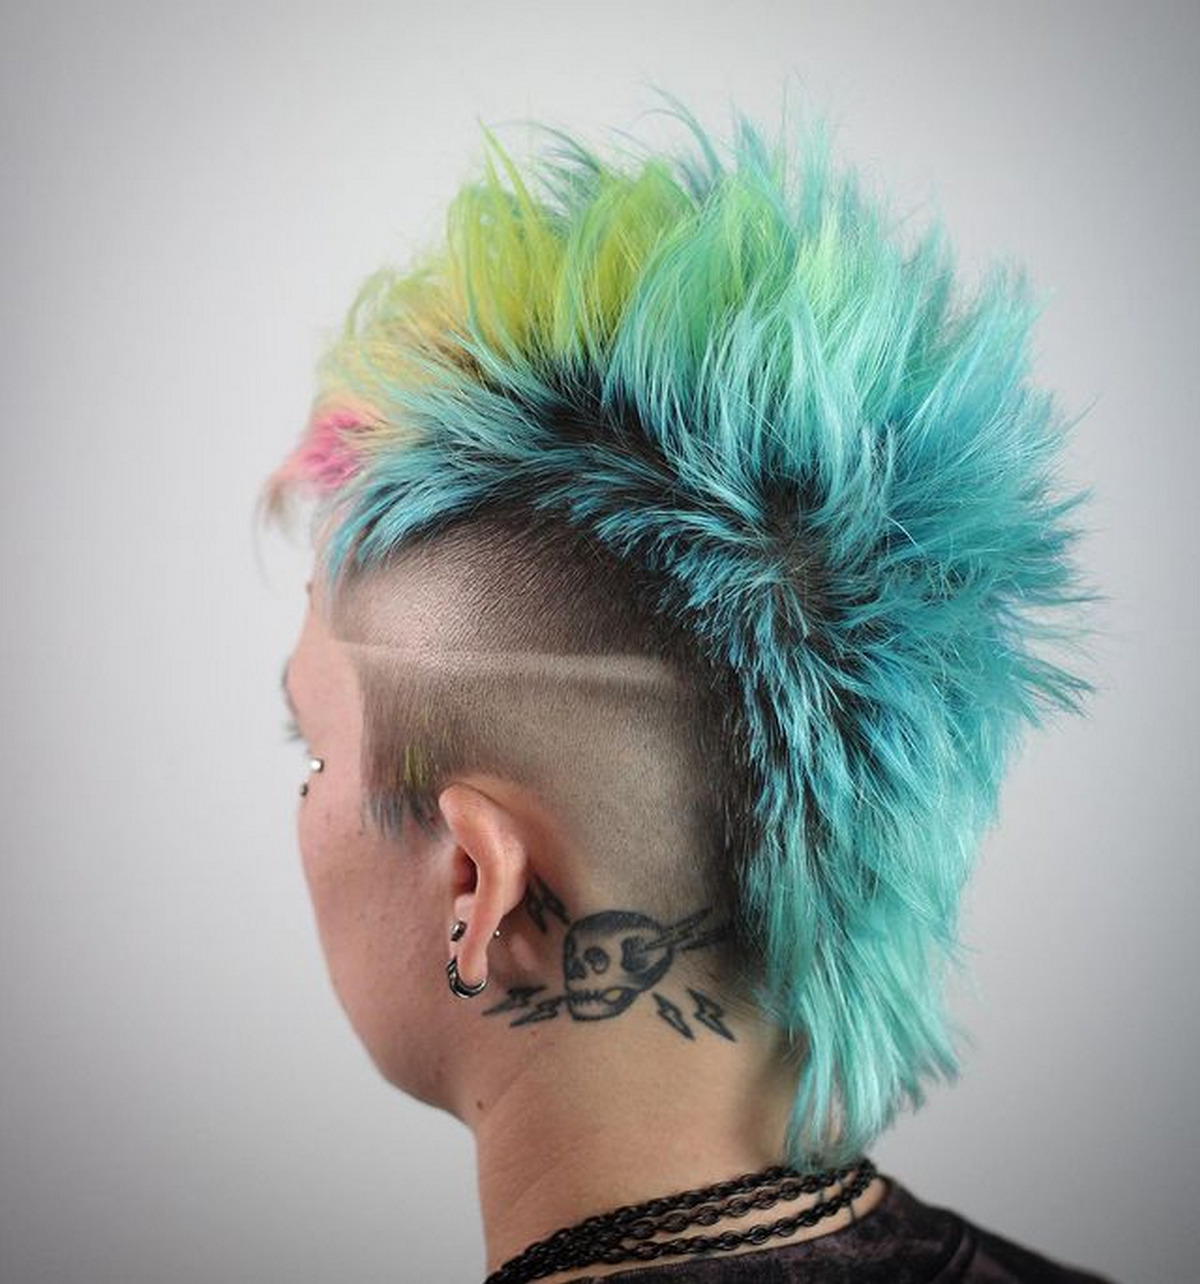 The Punk Spiky